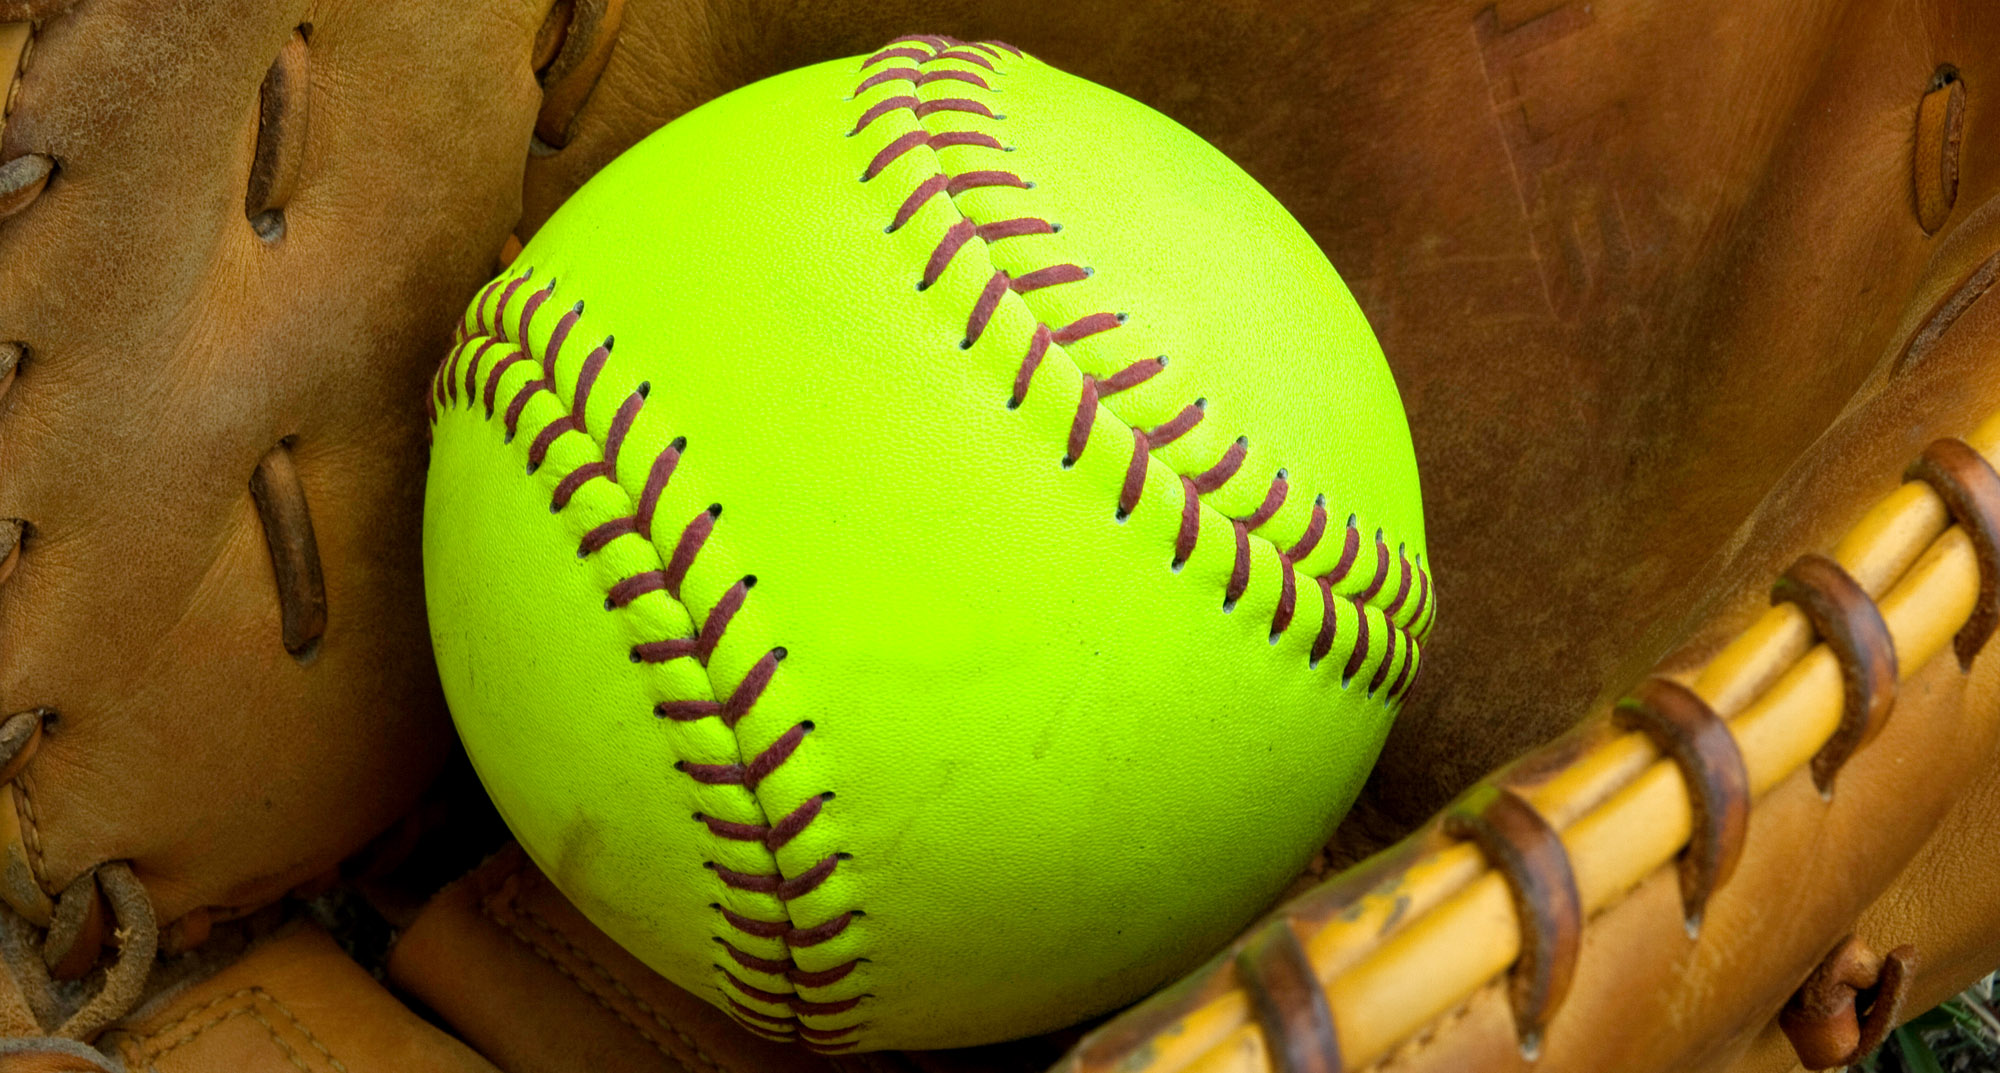 Softball Photos Download The BEST Free Softball Stock Photos  HD Images